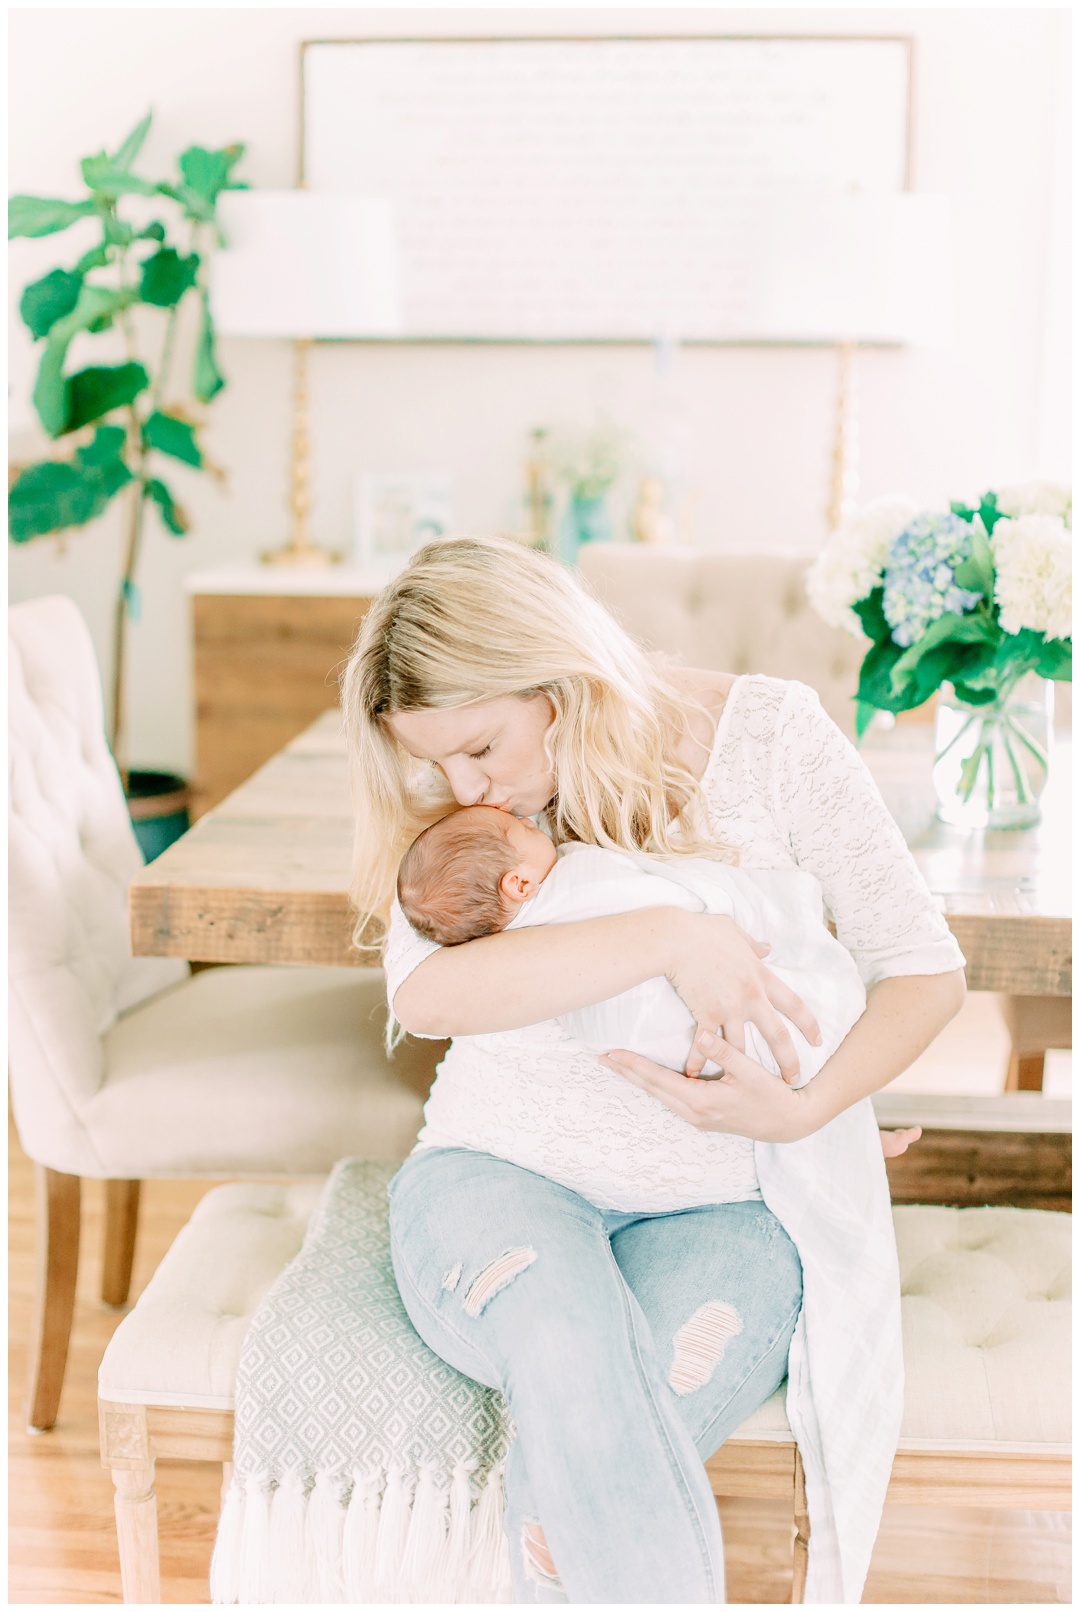 The_Moore's_Family_Newport_Beach_Lifestyle_Family_Photographer_Orange_County_Family_Photography_Cori_Kleckner_Photography_Orange_County_Newborn_Photographer_Family_Photos_Session__1416.jpg